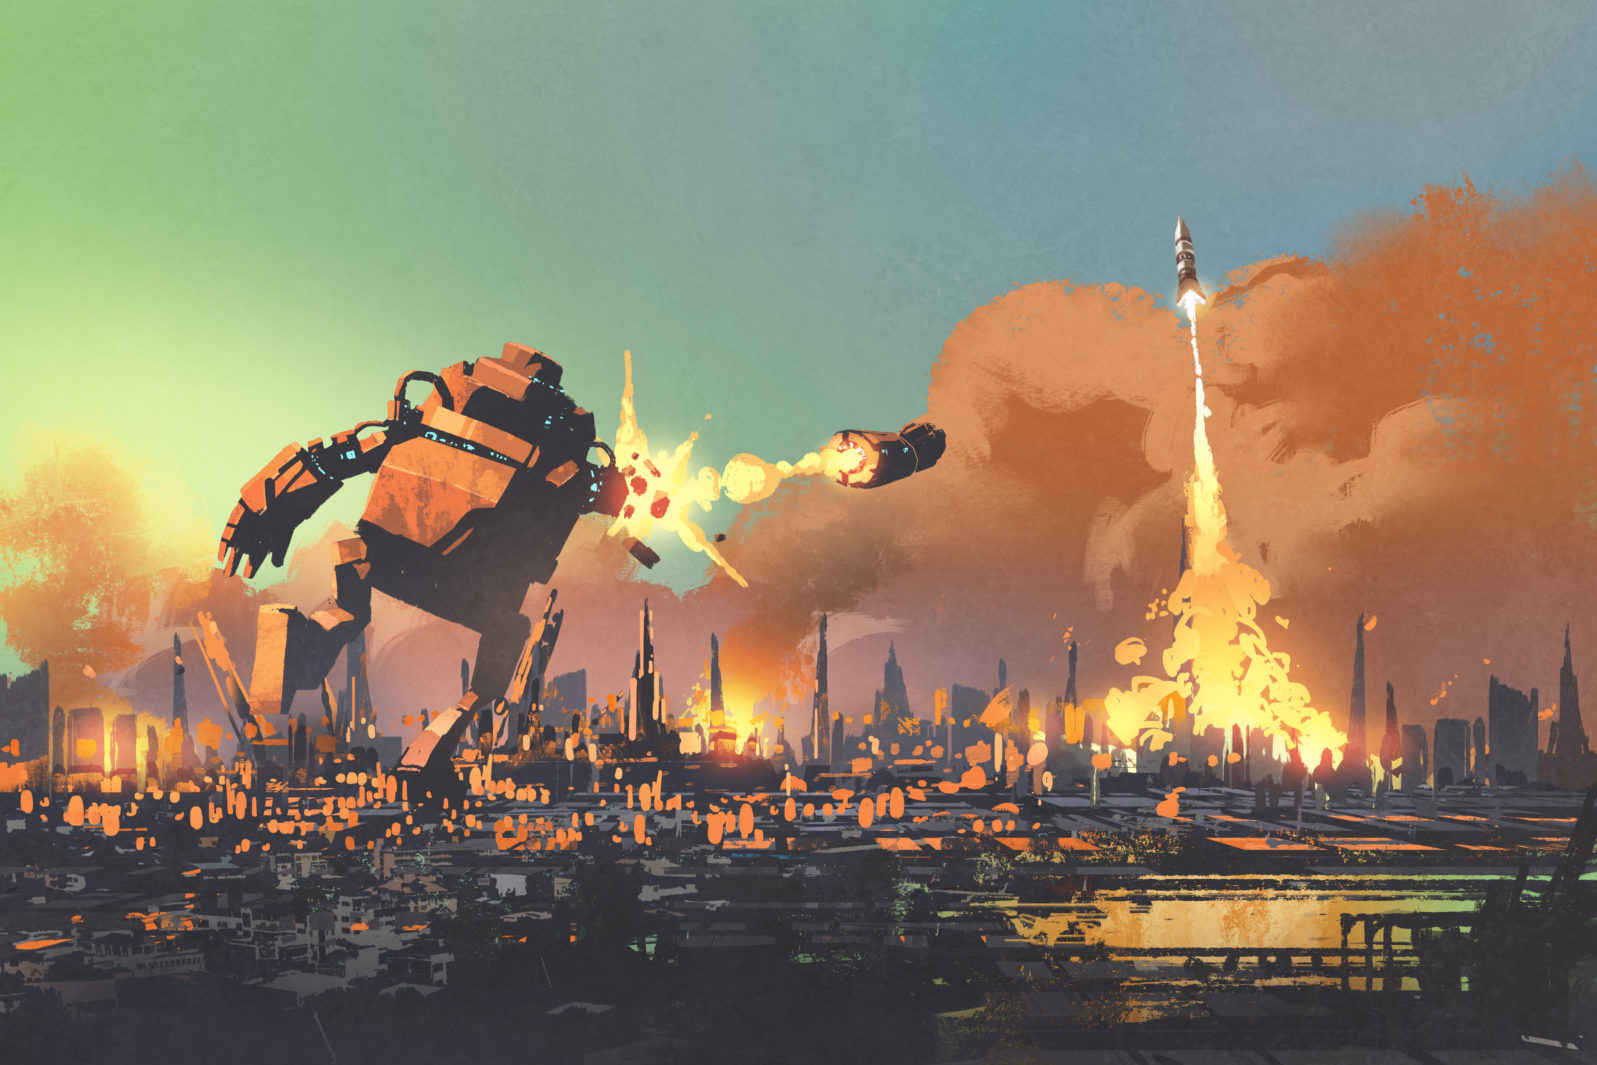 the giant robot launching rocket punch destroy the city,illustration painting